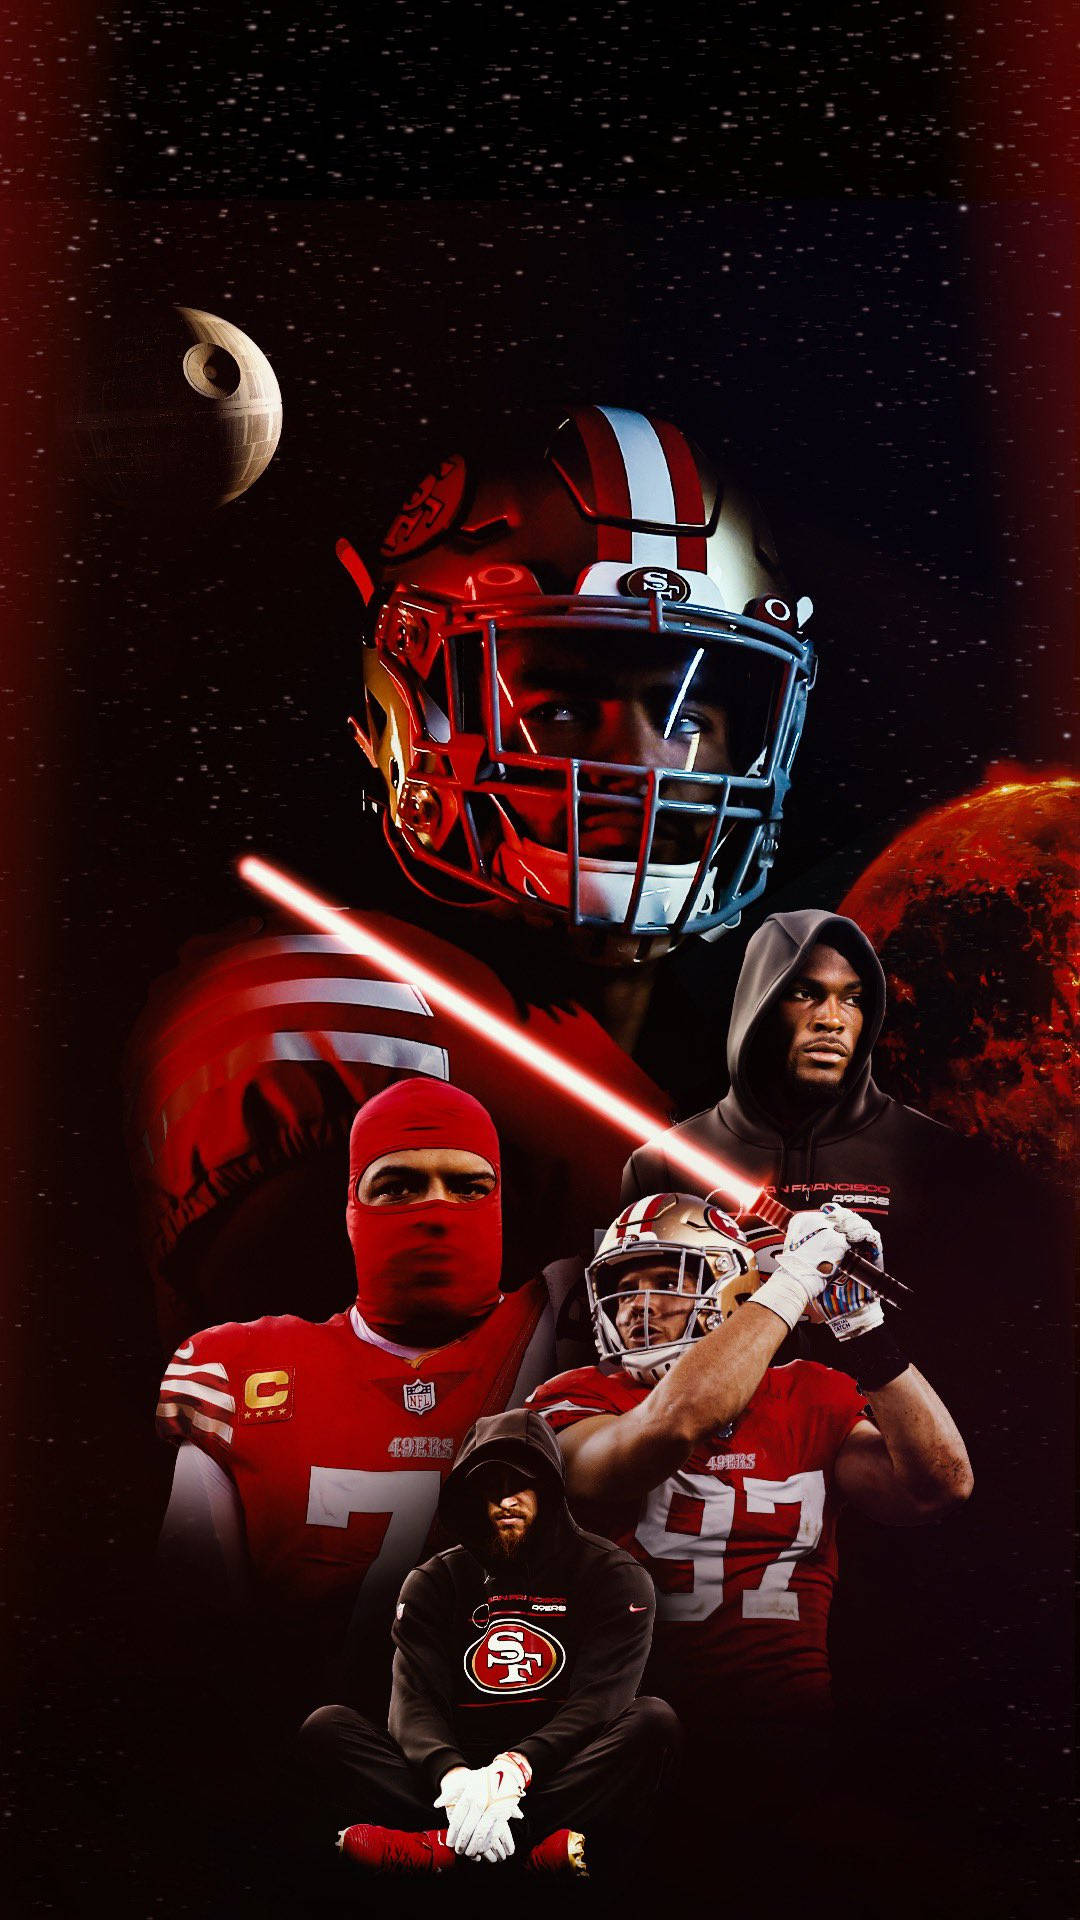 San Francisco 49ers on Twitter Wicked wallpapers  WallpaperWednesday  httpstcovZuPFtaBgh  X